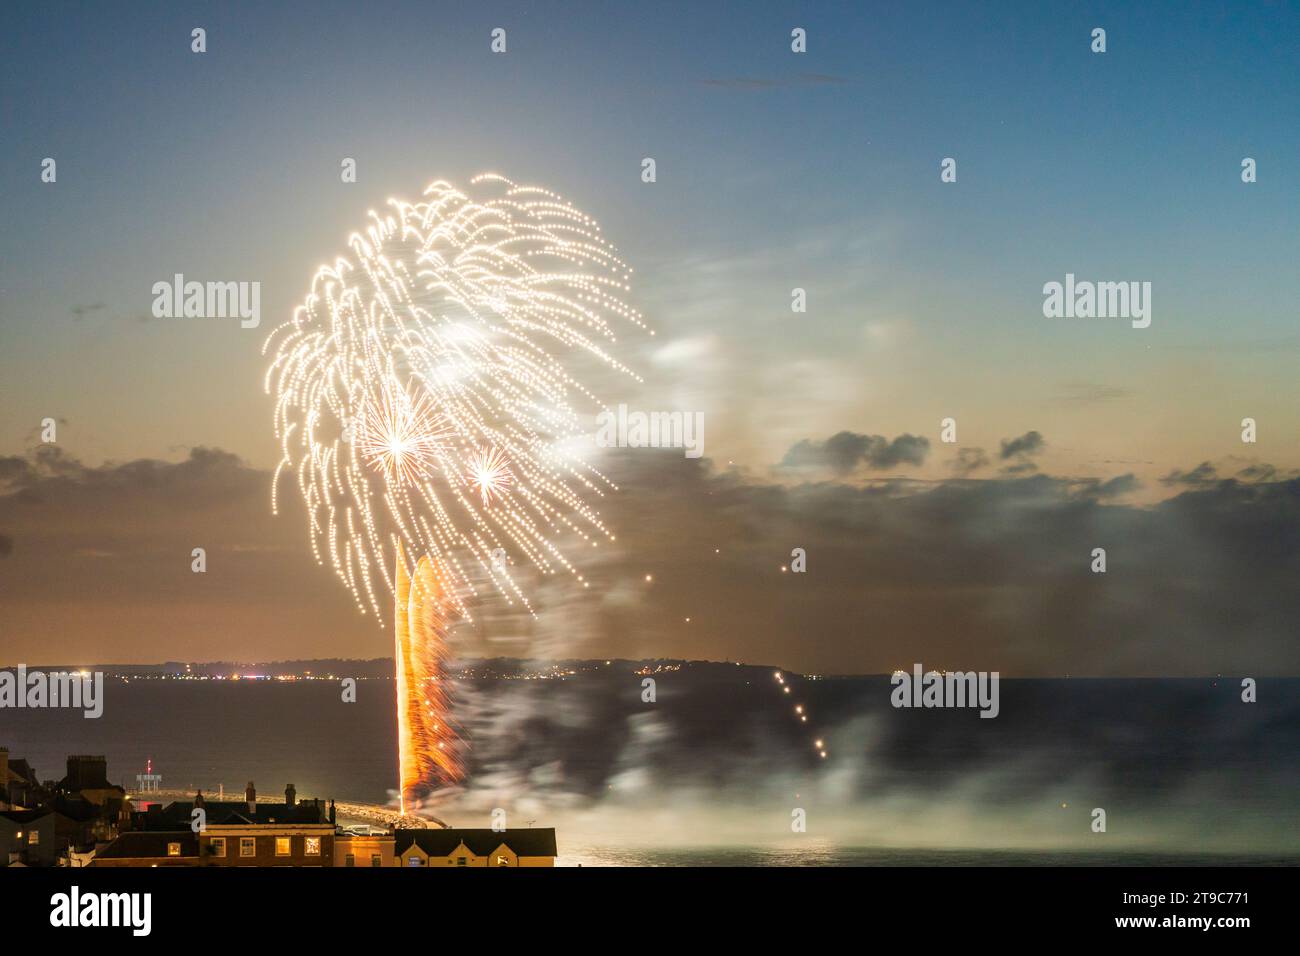 Fireworks bursting over the seafront and harbour at the Kent resort town of Herne Bay on a summer night. Isle of Sheppey in the background. Stock Photo